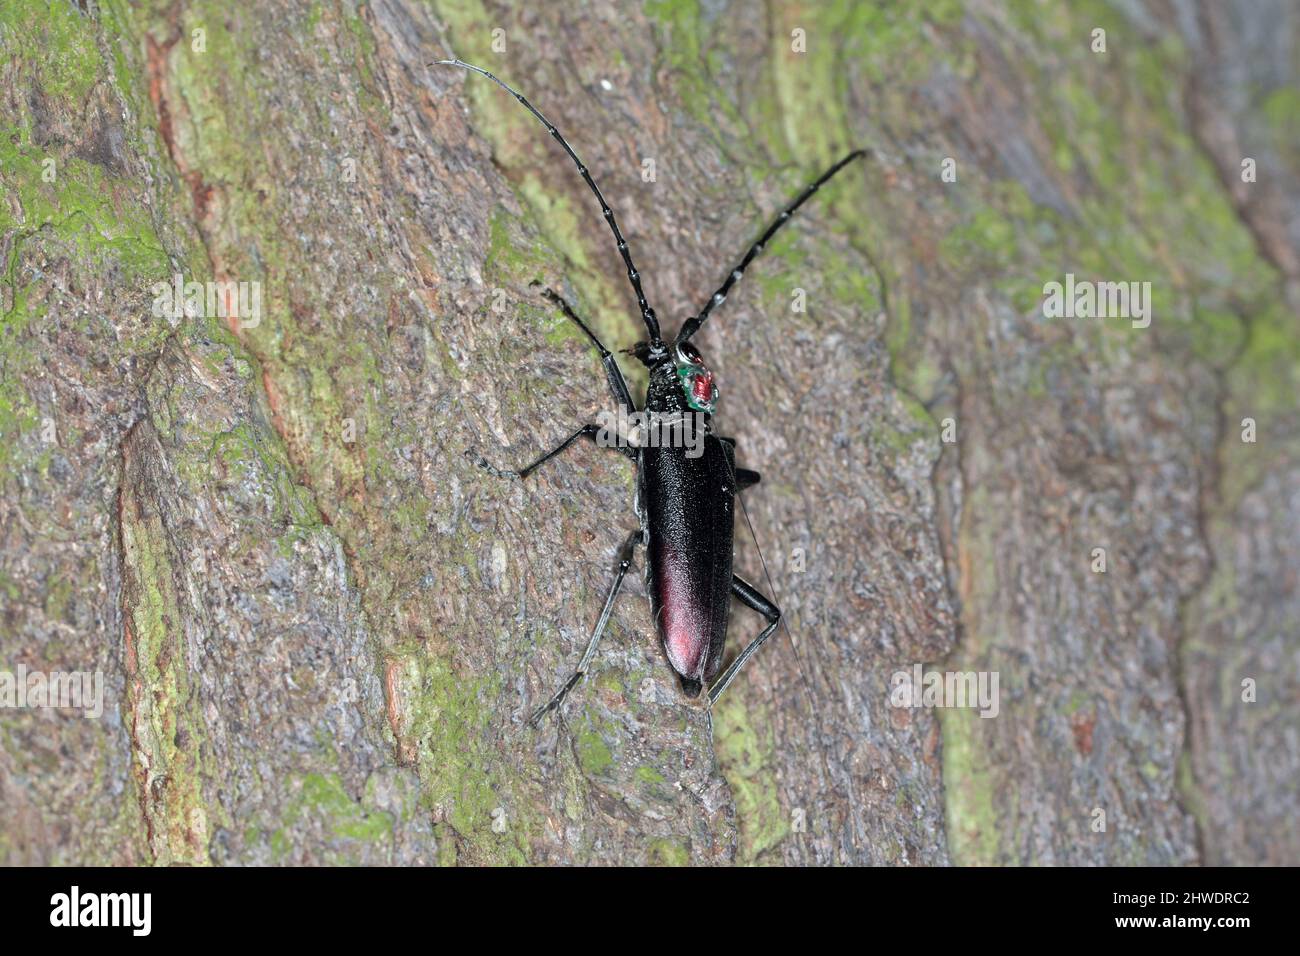 Great capricorn beetle (Cerambyx cerdo) with a tracking radio transmitter. Stock Photo